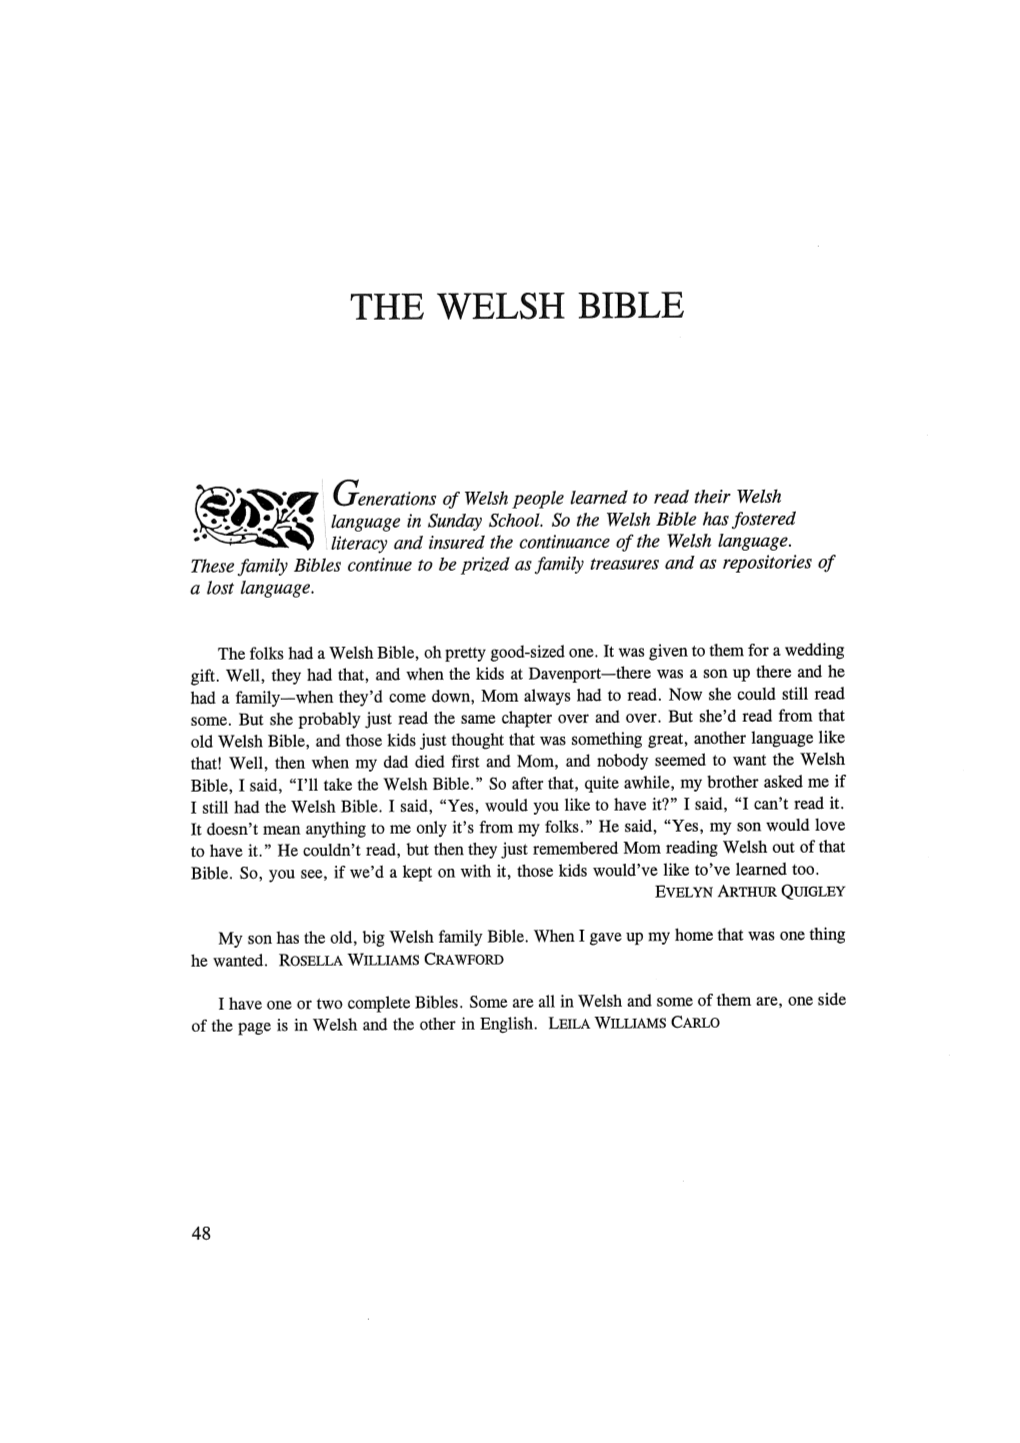 The Welsh Bible